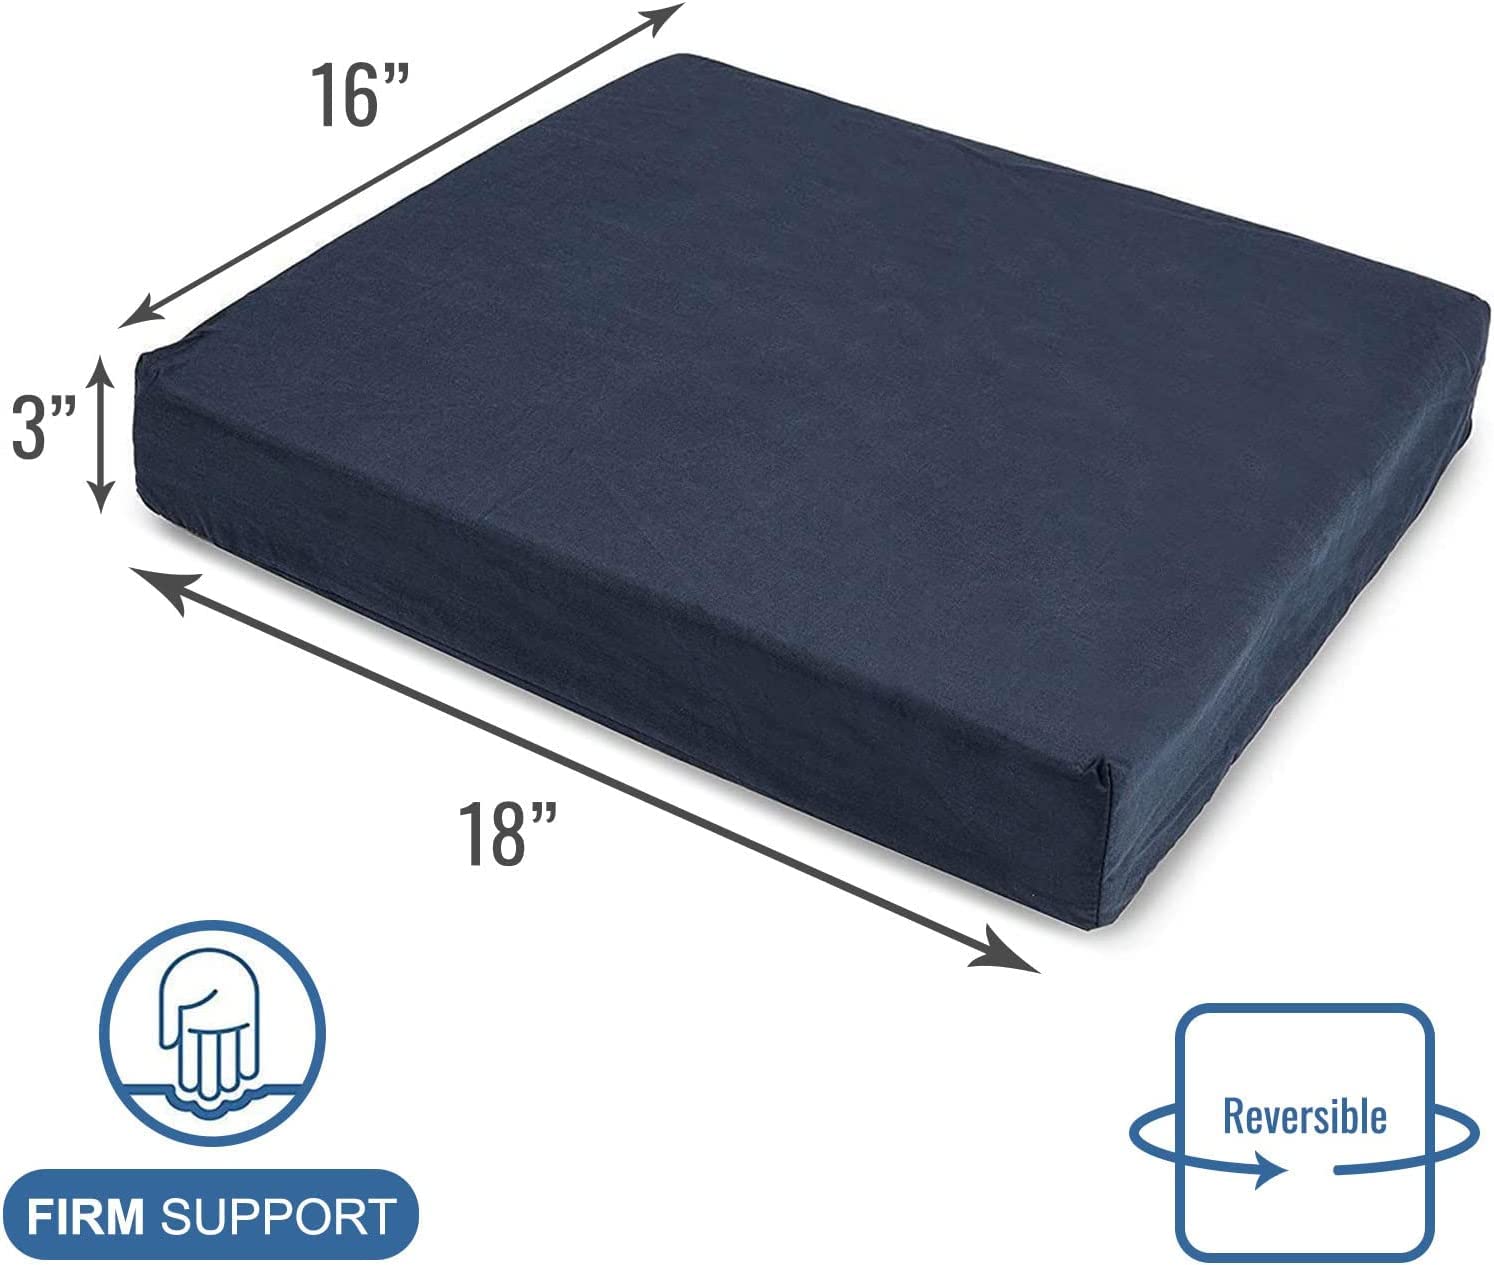 DMI Seat Cushion and Chair Cushion for Office Chairs, Wheelchairs, Scooters, Kitchen Chairs or Car Seats, FSA HSA Eligible, for Support and Height while Reducing Stress on Back, Tailbone or Sciatica